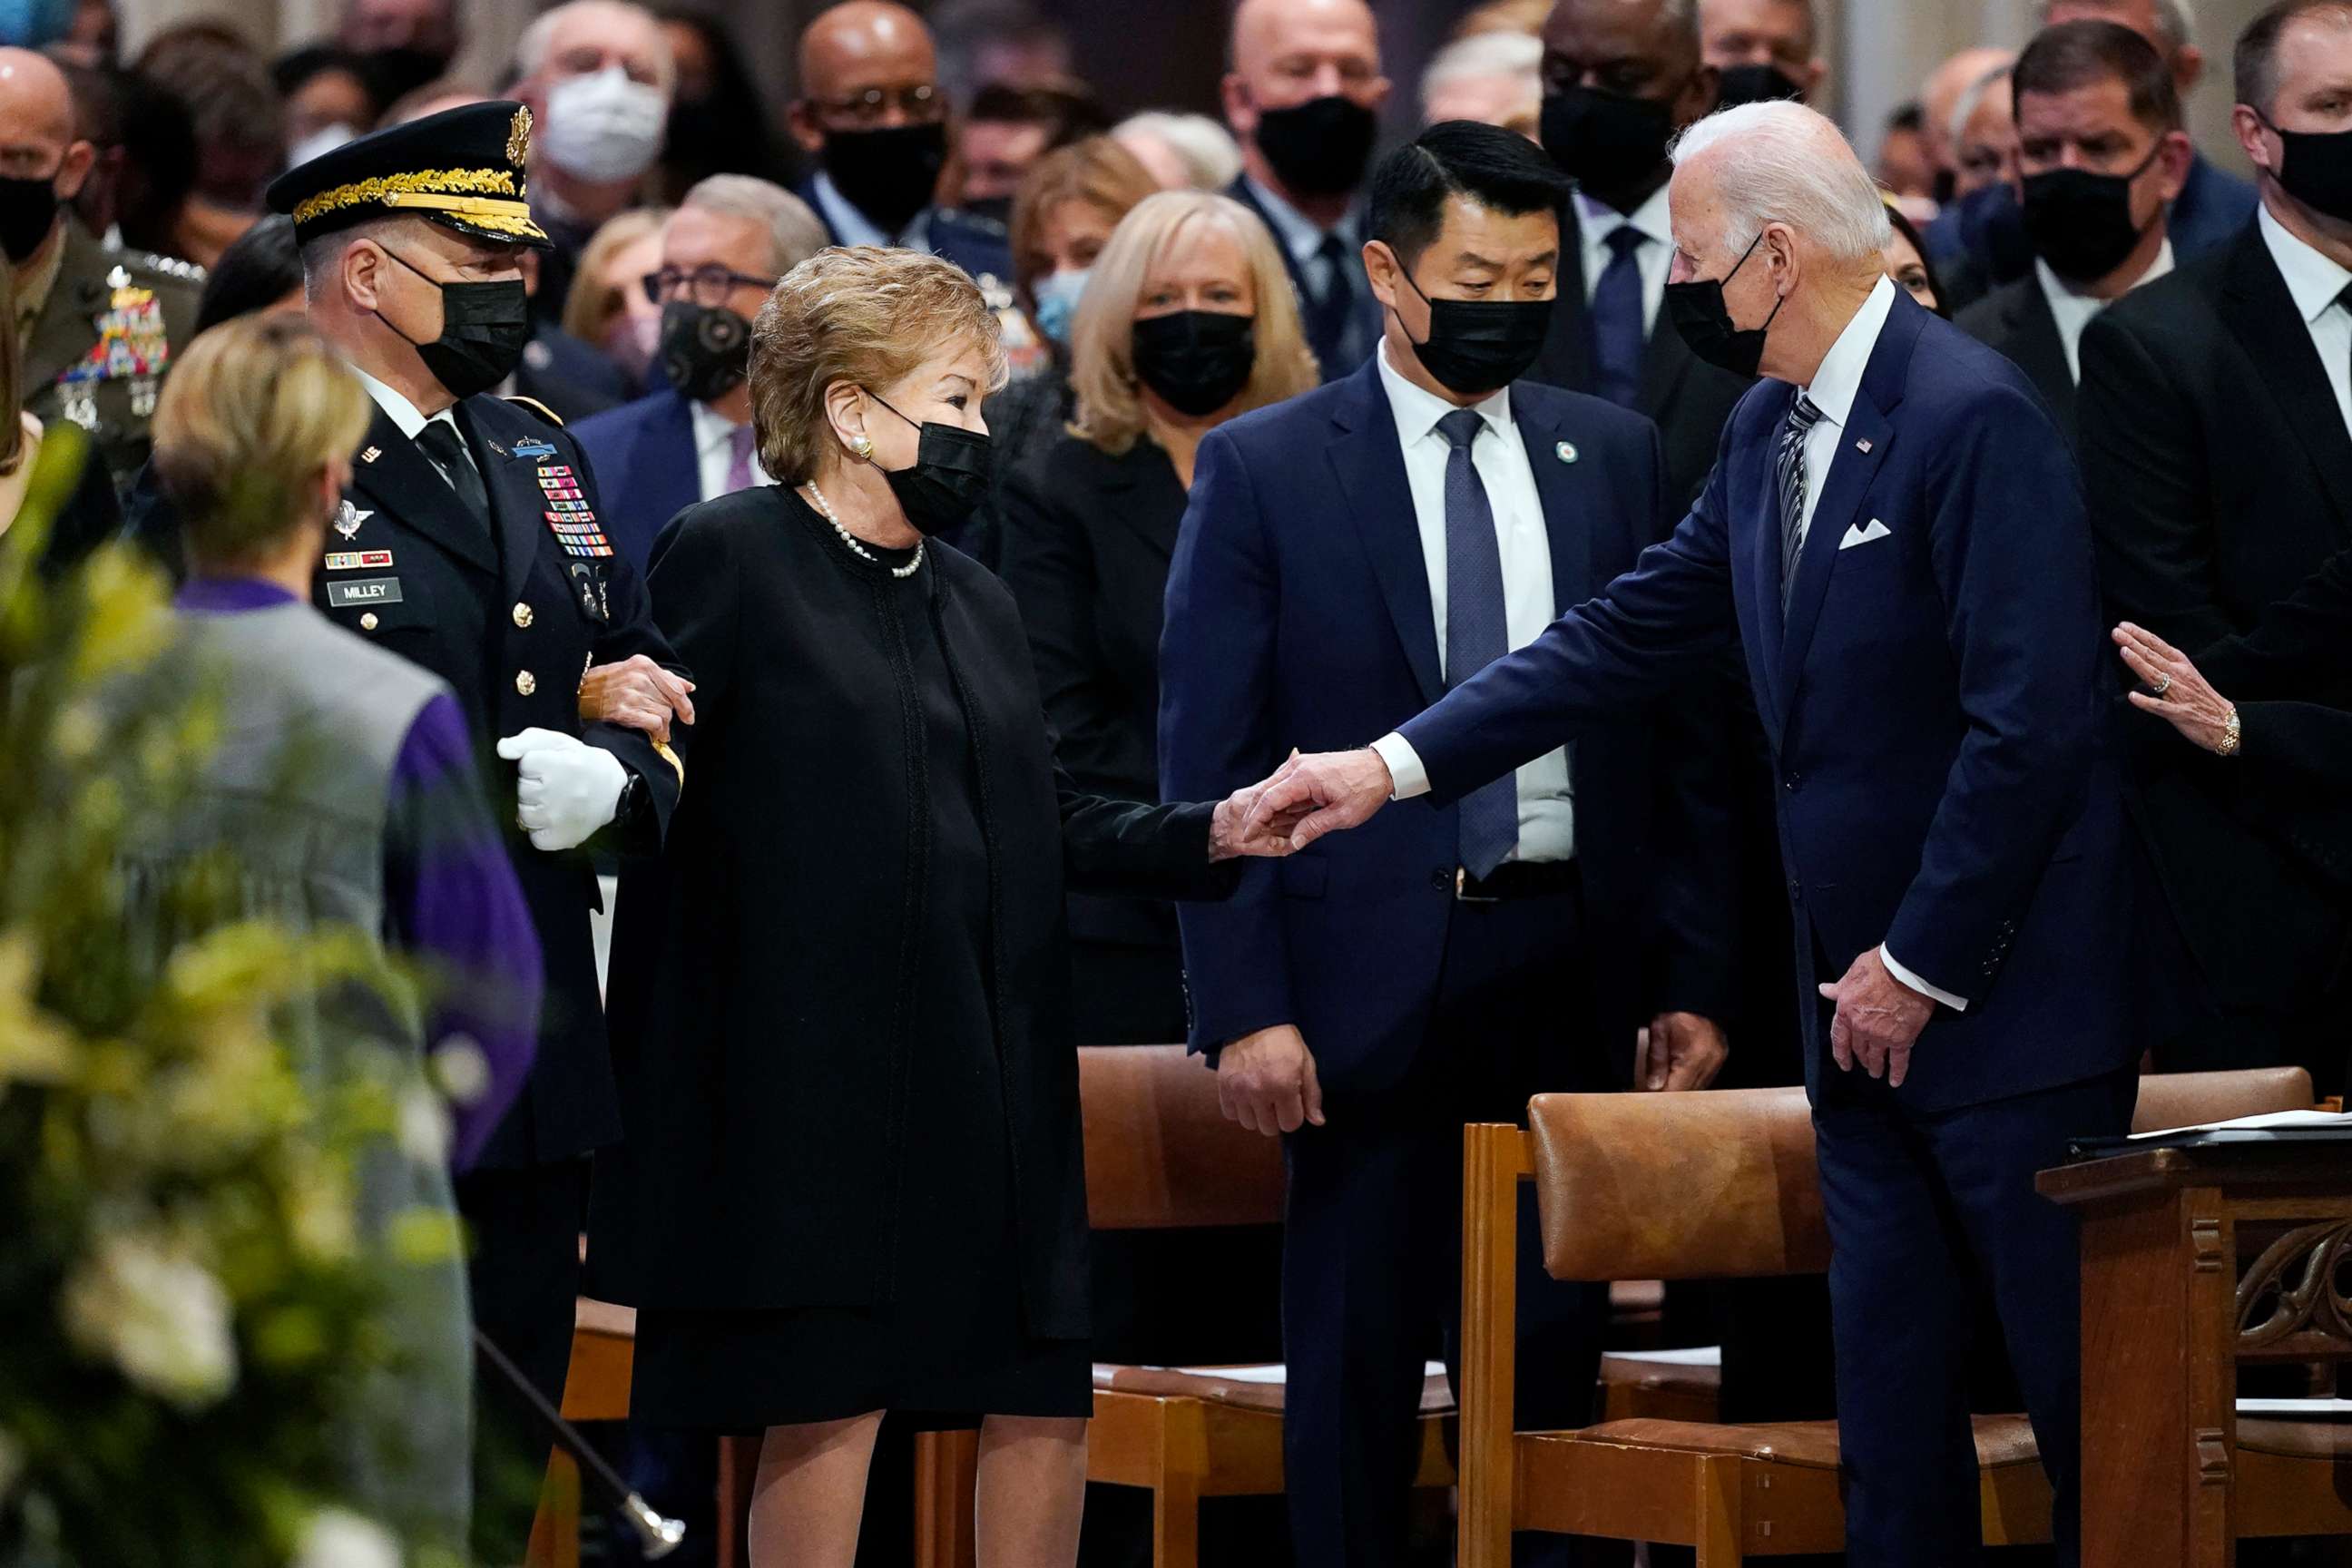 PHOTO: President Joe Biden greets Sen. Elizabeth Dole, accompanied by Chairman of the Joint Chiefs Mark Milley, left, as she arrives at the funeral for her husband, former Sen. Bob Dole.